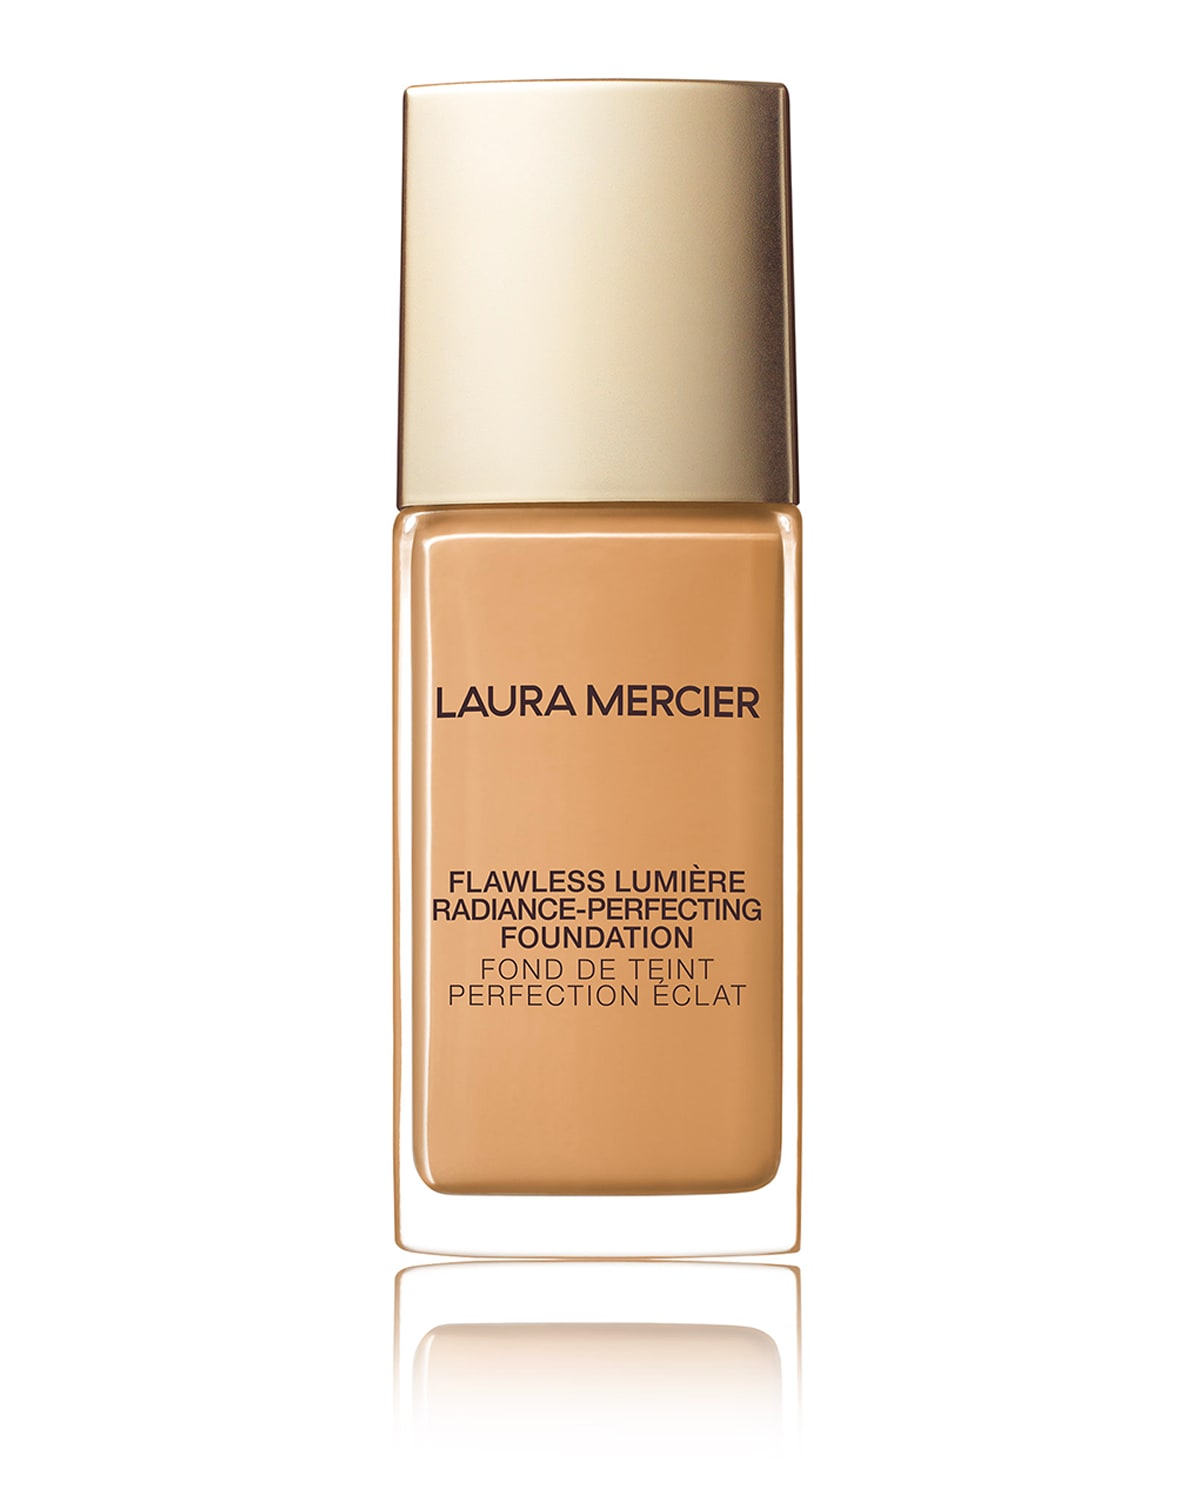 Flawless Lumi&#232re Radiance-Perfecting Foundation